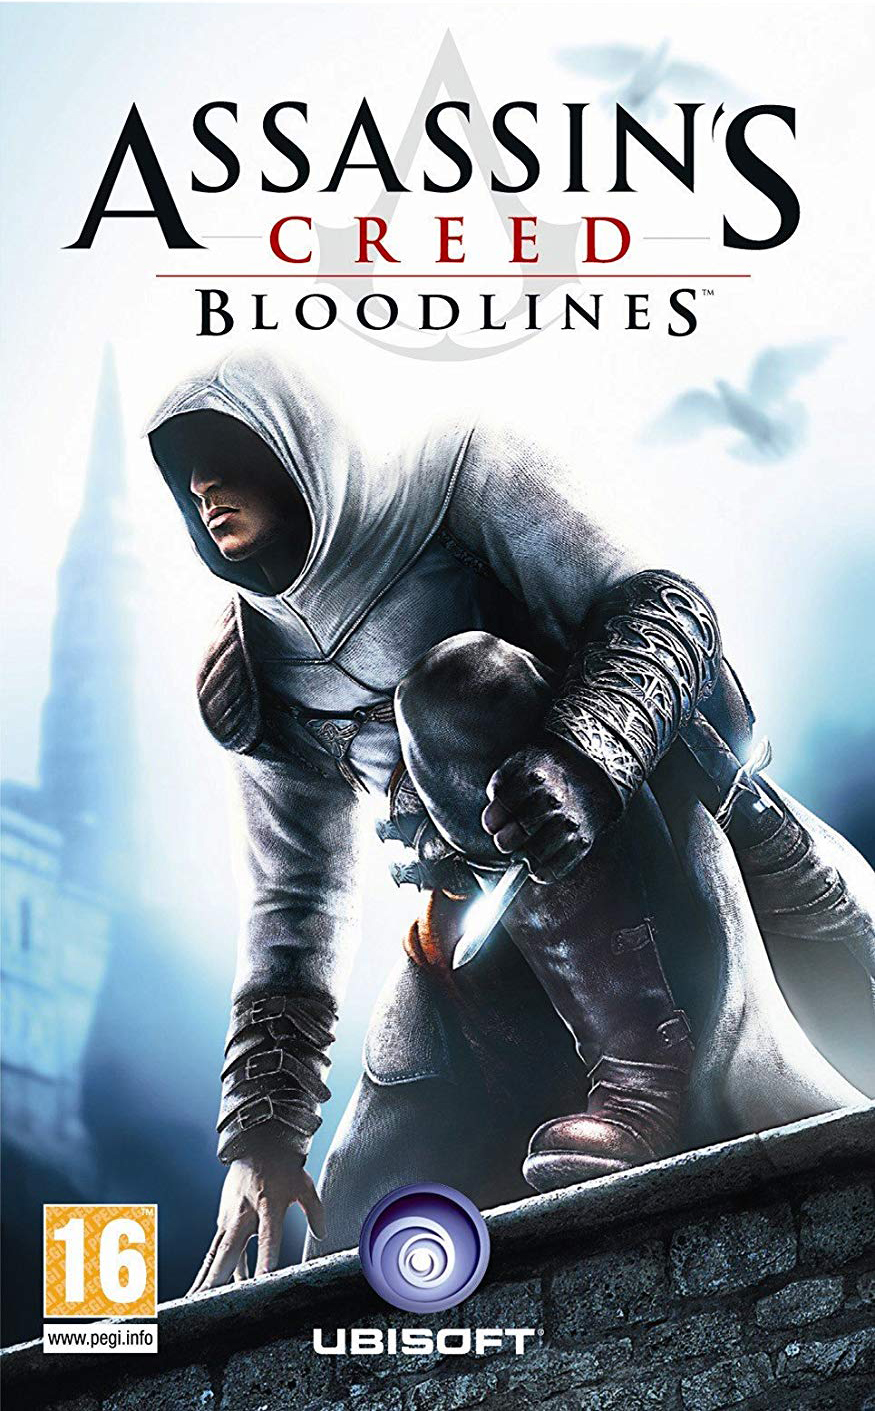 assassins creed bloodlines low settings ppsspp